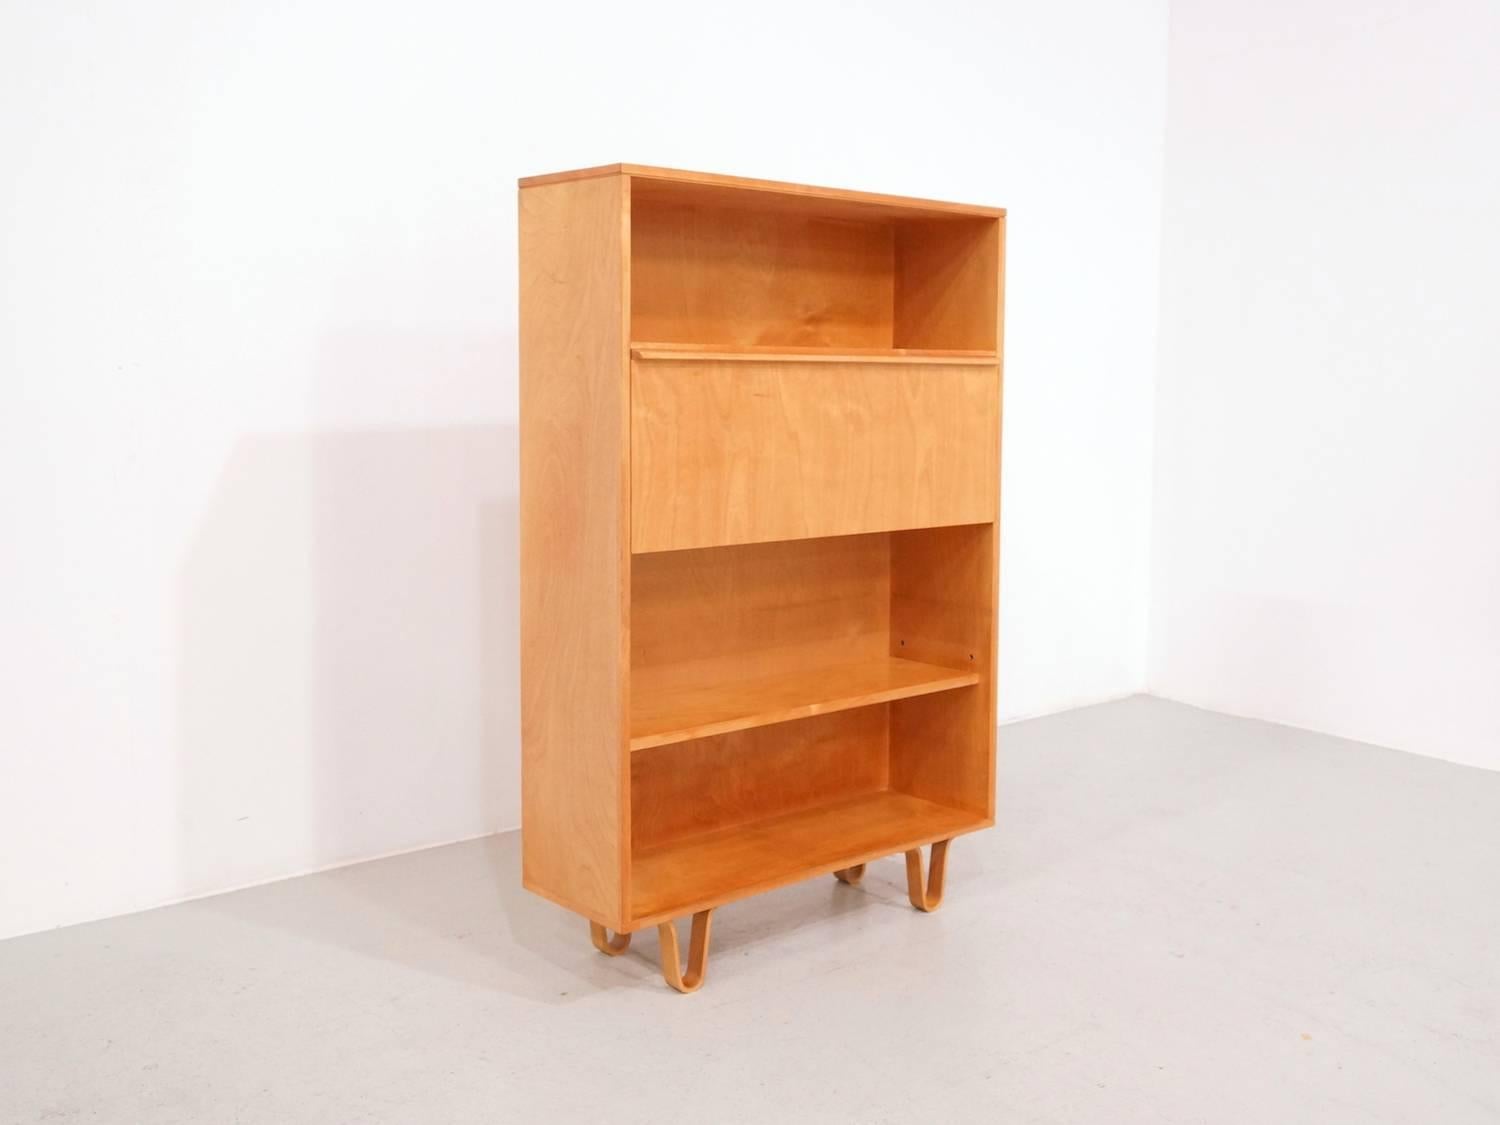 Beautiful bookcase -desk from the Birch series, designed in the 1950s by Cees Braakman. Manufactured in the Netherlands by Pastoe in the 1950s. The Birch series is one of most beautiful and sought after Designs from Cees Braakman. The simple design